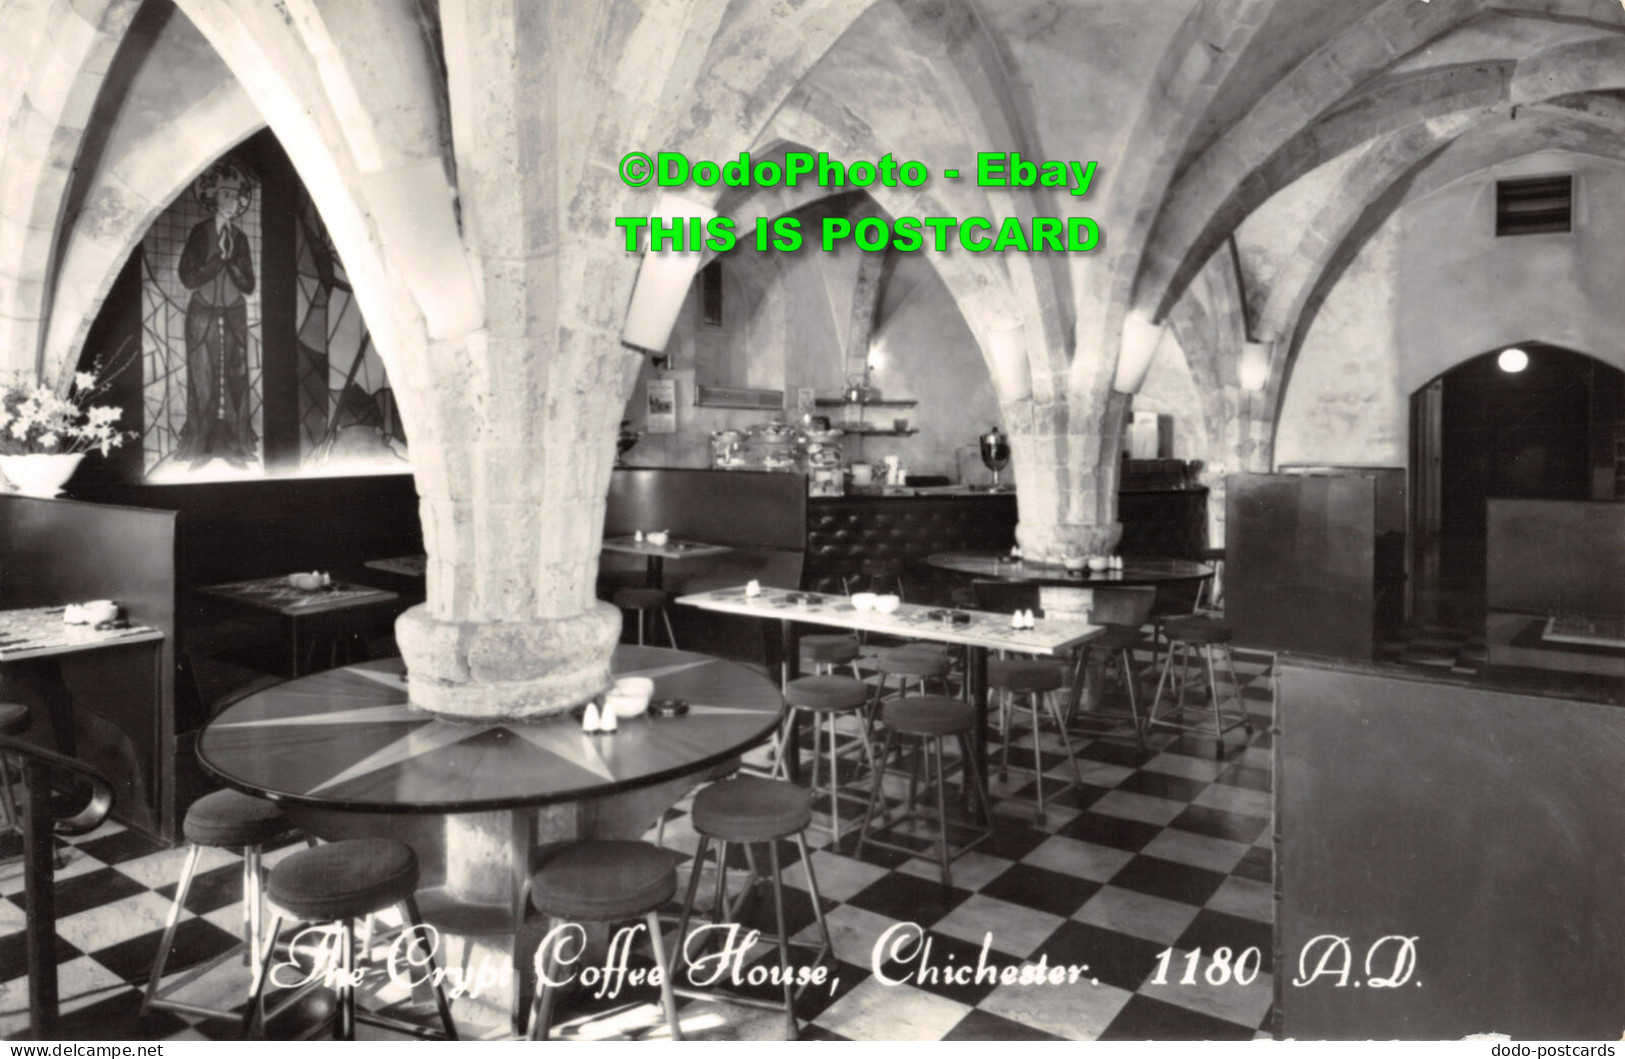 R454846 The Crypt Coffee House. Chichester. 1180 A. D. RP - Welt